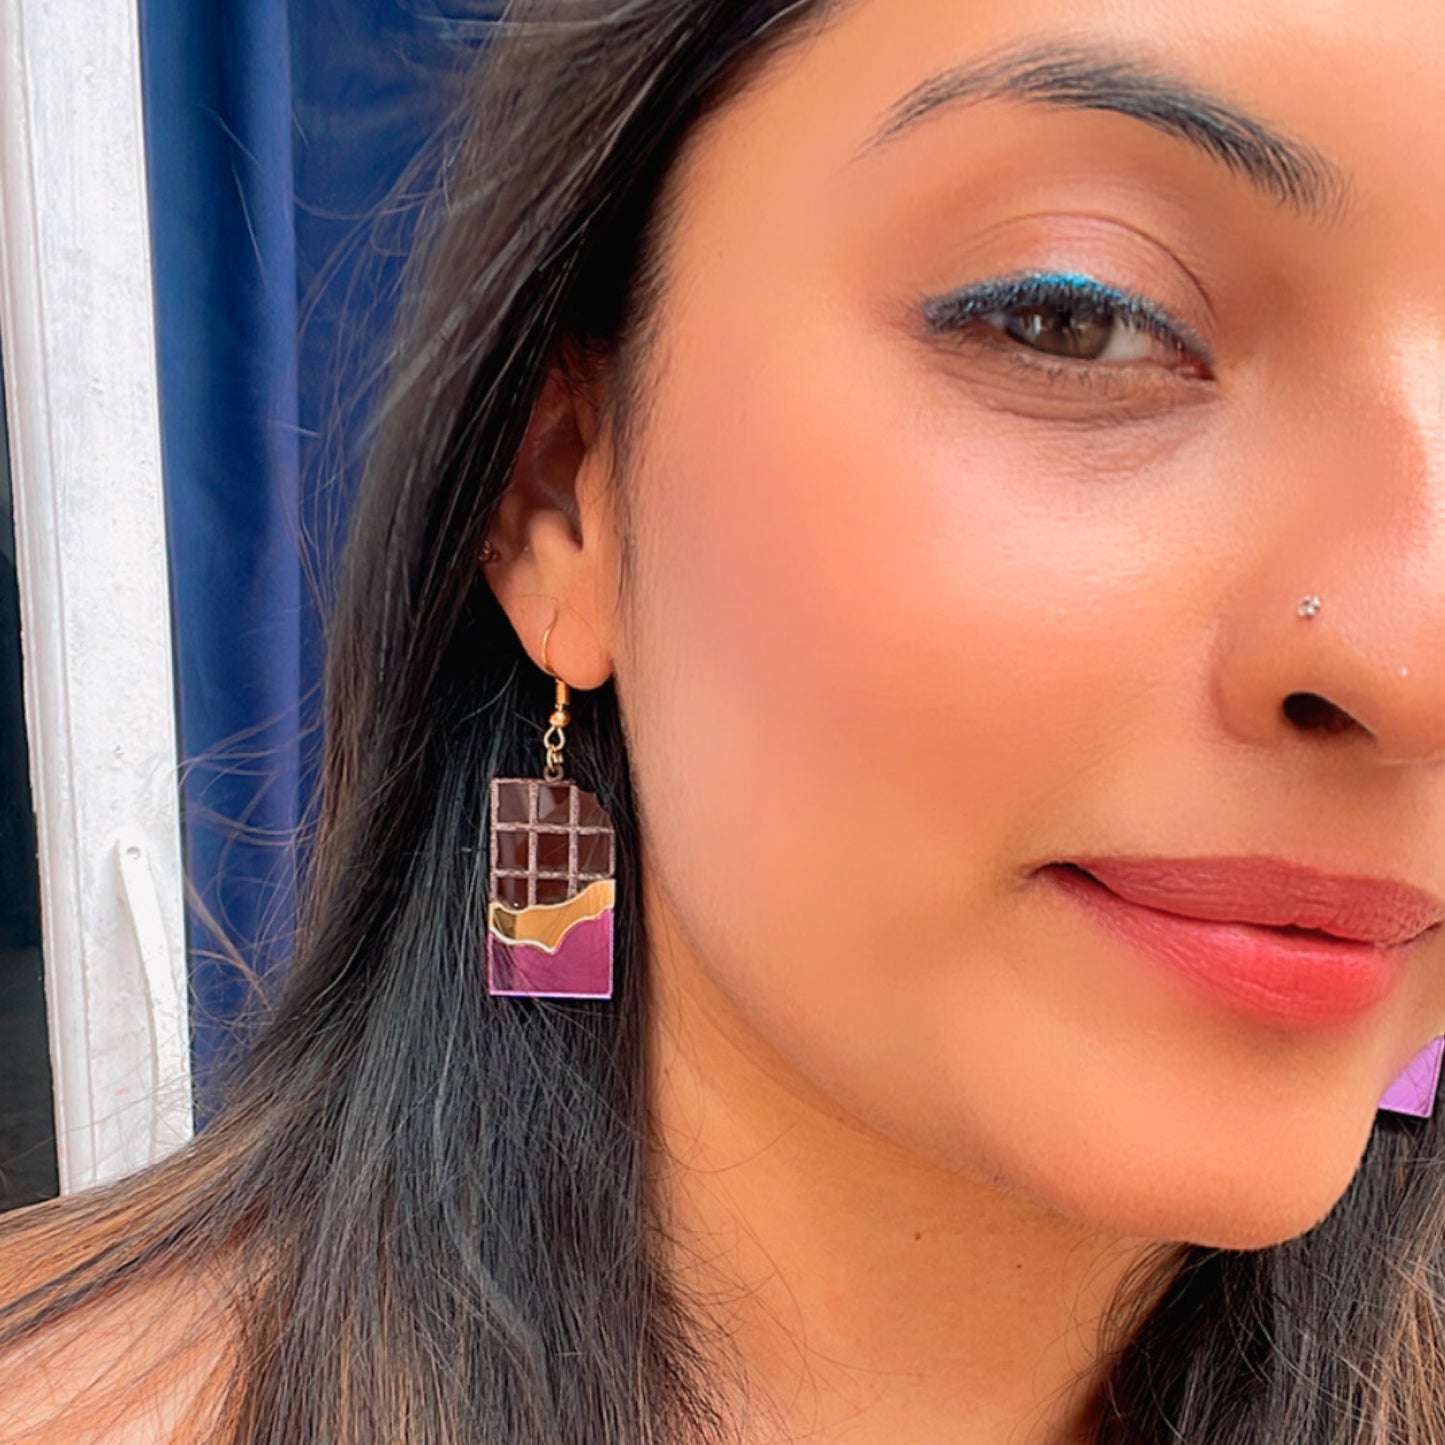 Choco Candy Earrings - Purple and Brown - Nian by Nidhi - worn by a woman